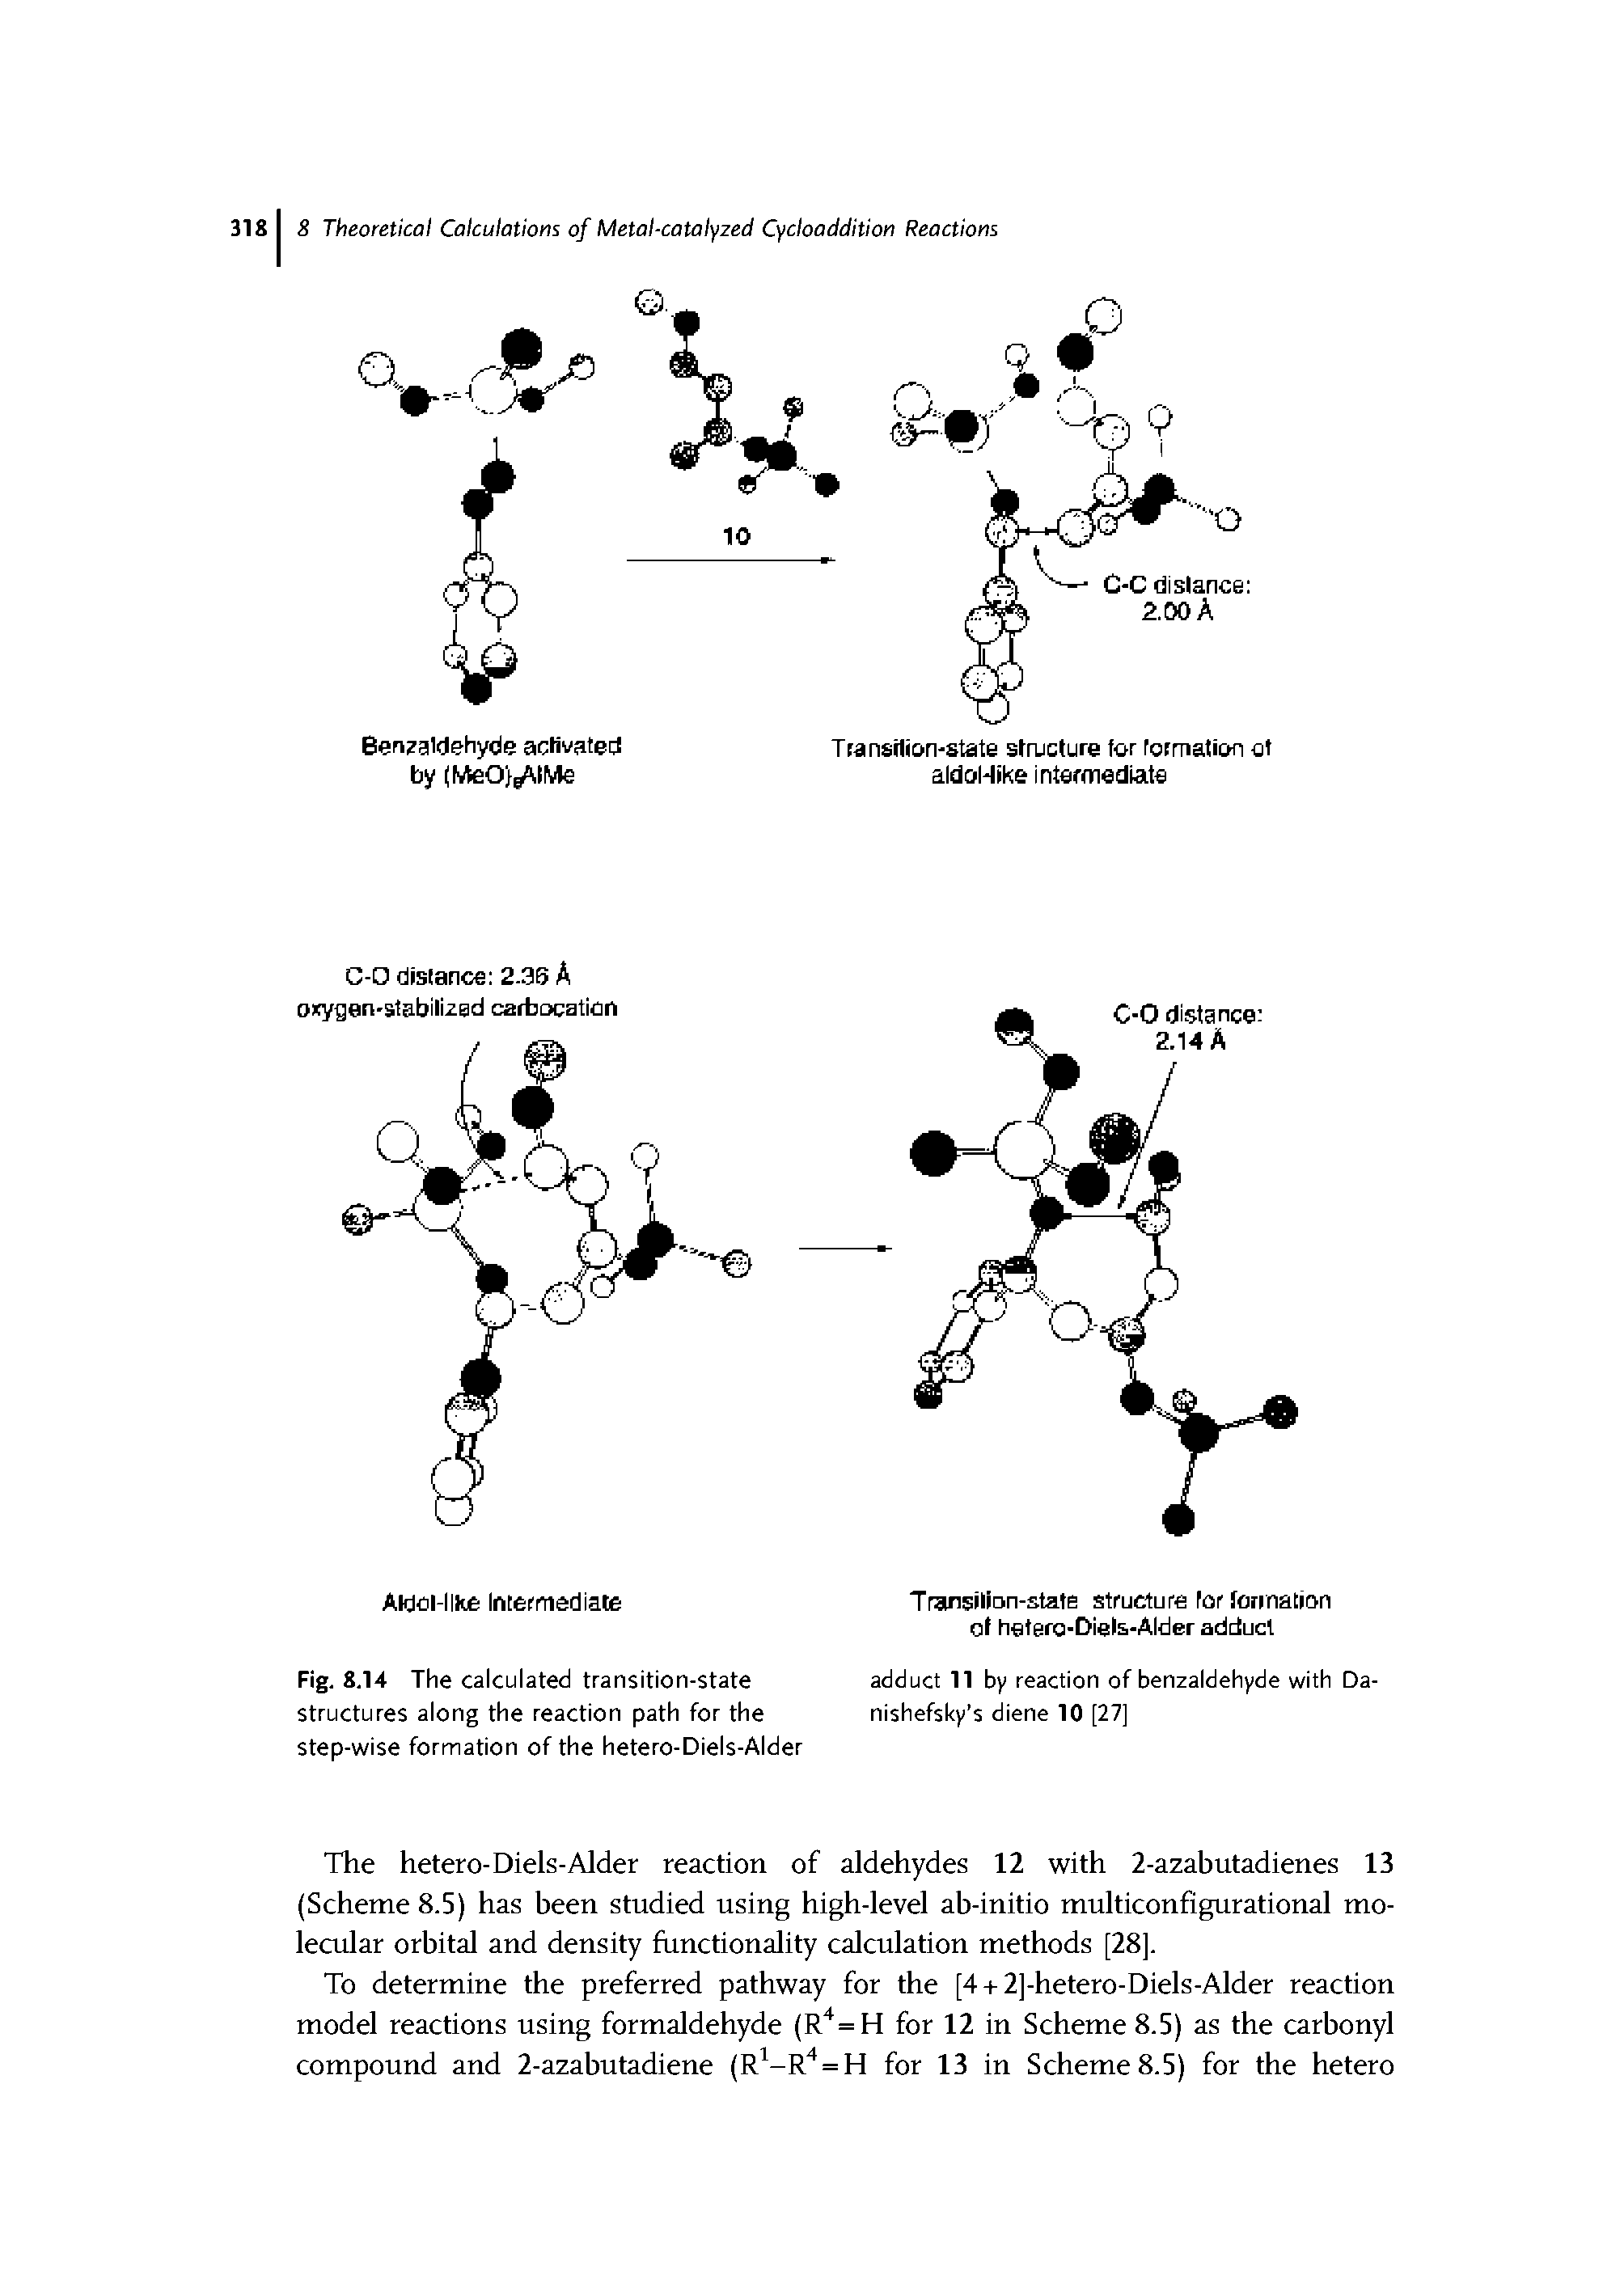 Fig. 8.14 The calculated transition-state structures along the reaction path for the step-wise formation of the hetero-Diels-Alder...